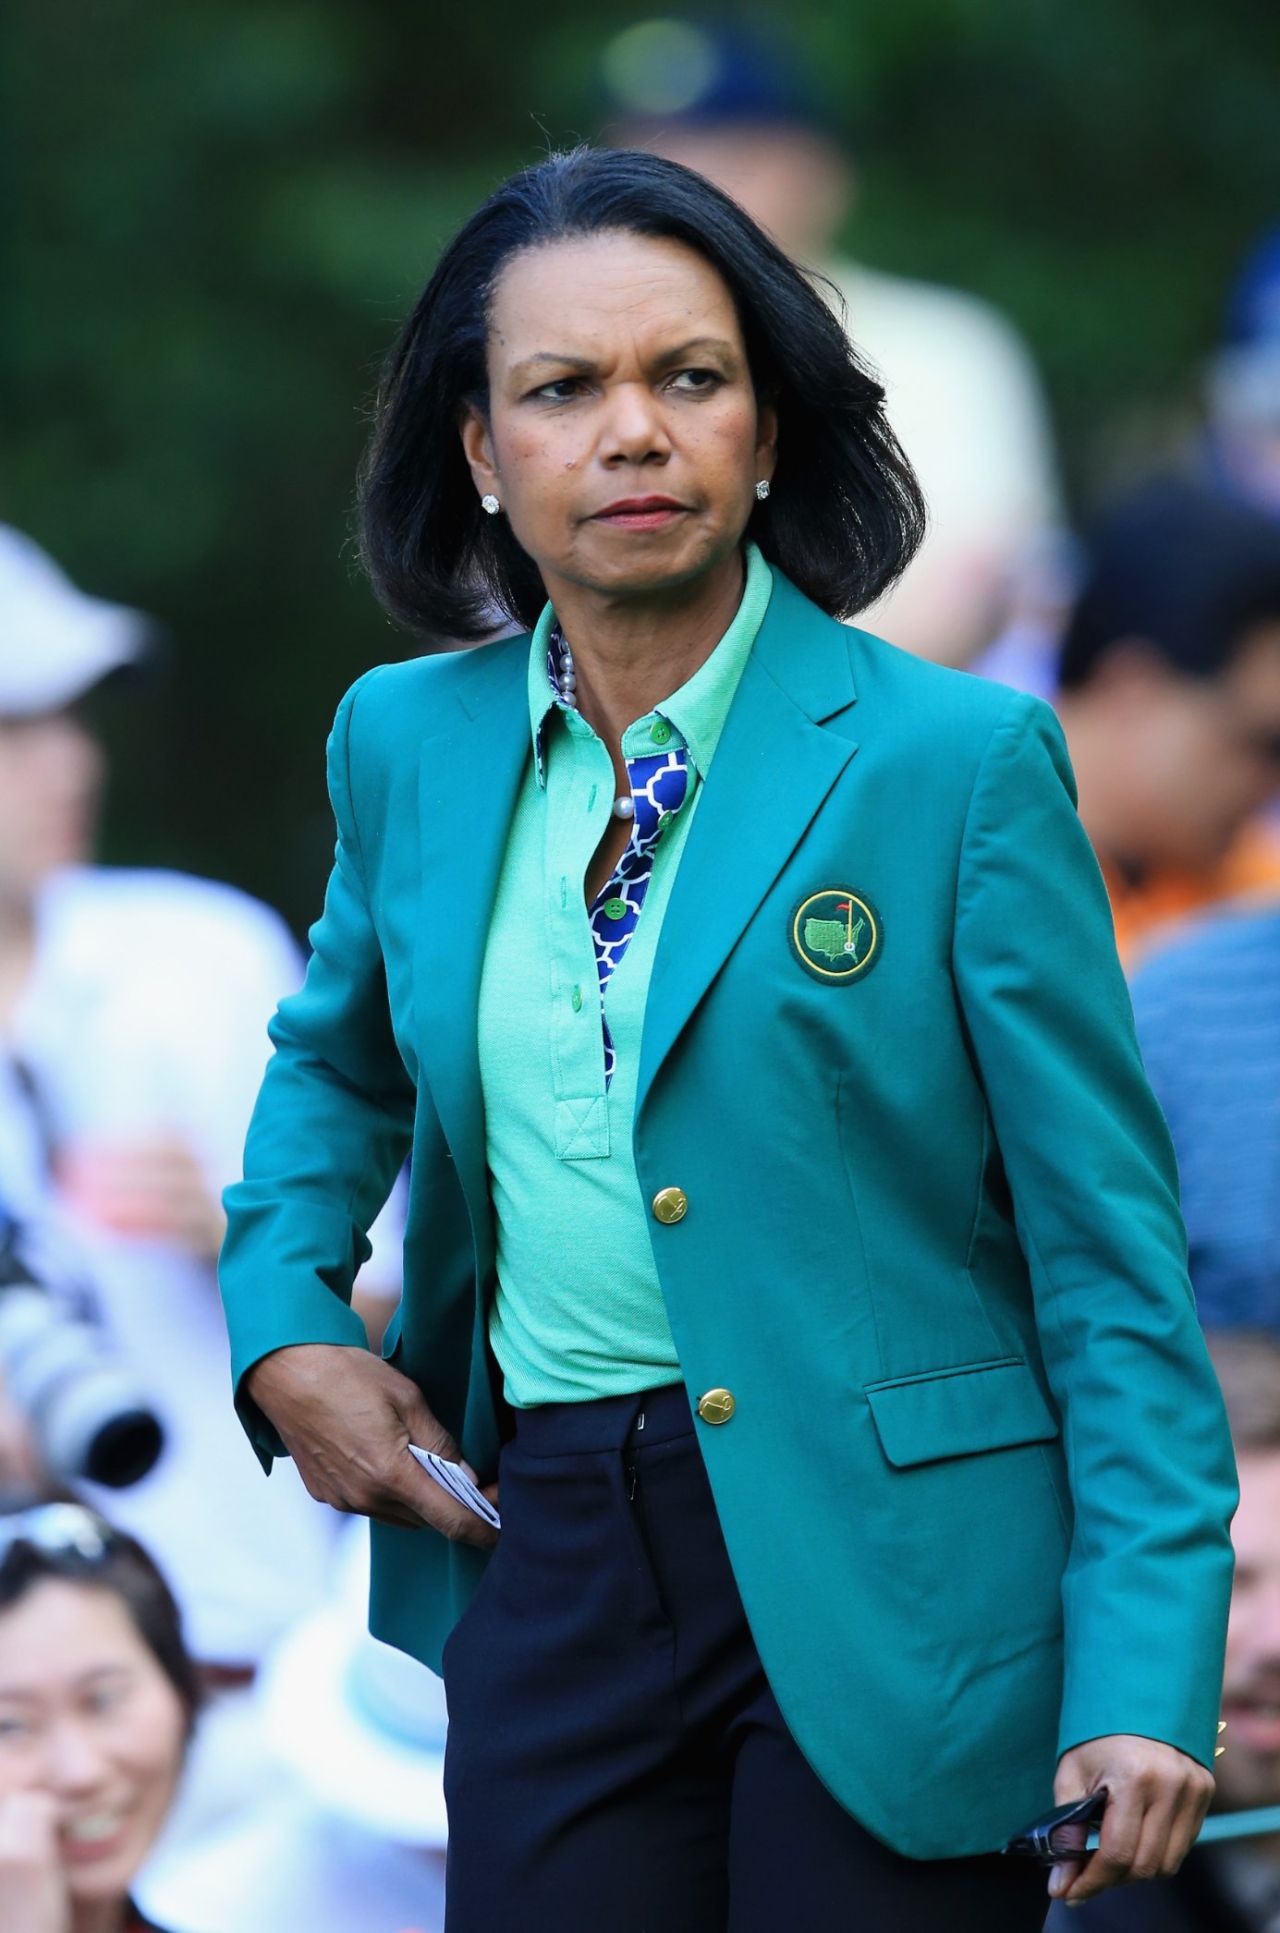 Not all golf clubs are as relaxed as Hoylake. It wasn't until 2012 that Augusta National Golf Club admitted women. Former Secretary of State  Condoleezza Rice and business executive Darla Moore were the first female members of Augusta.